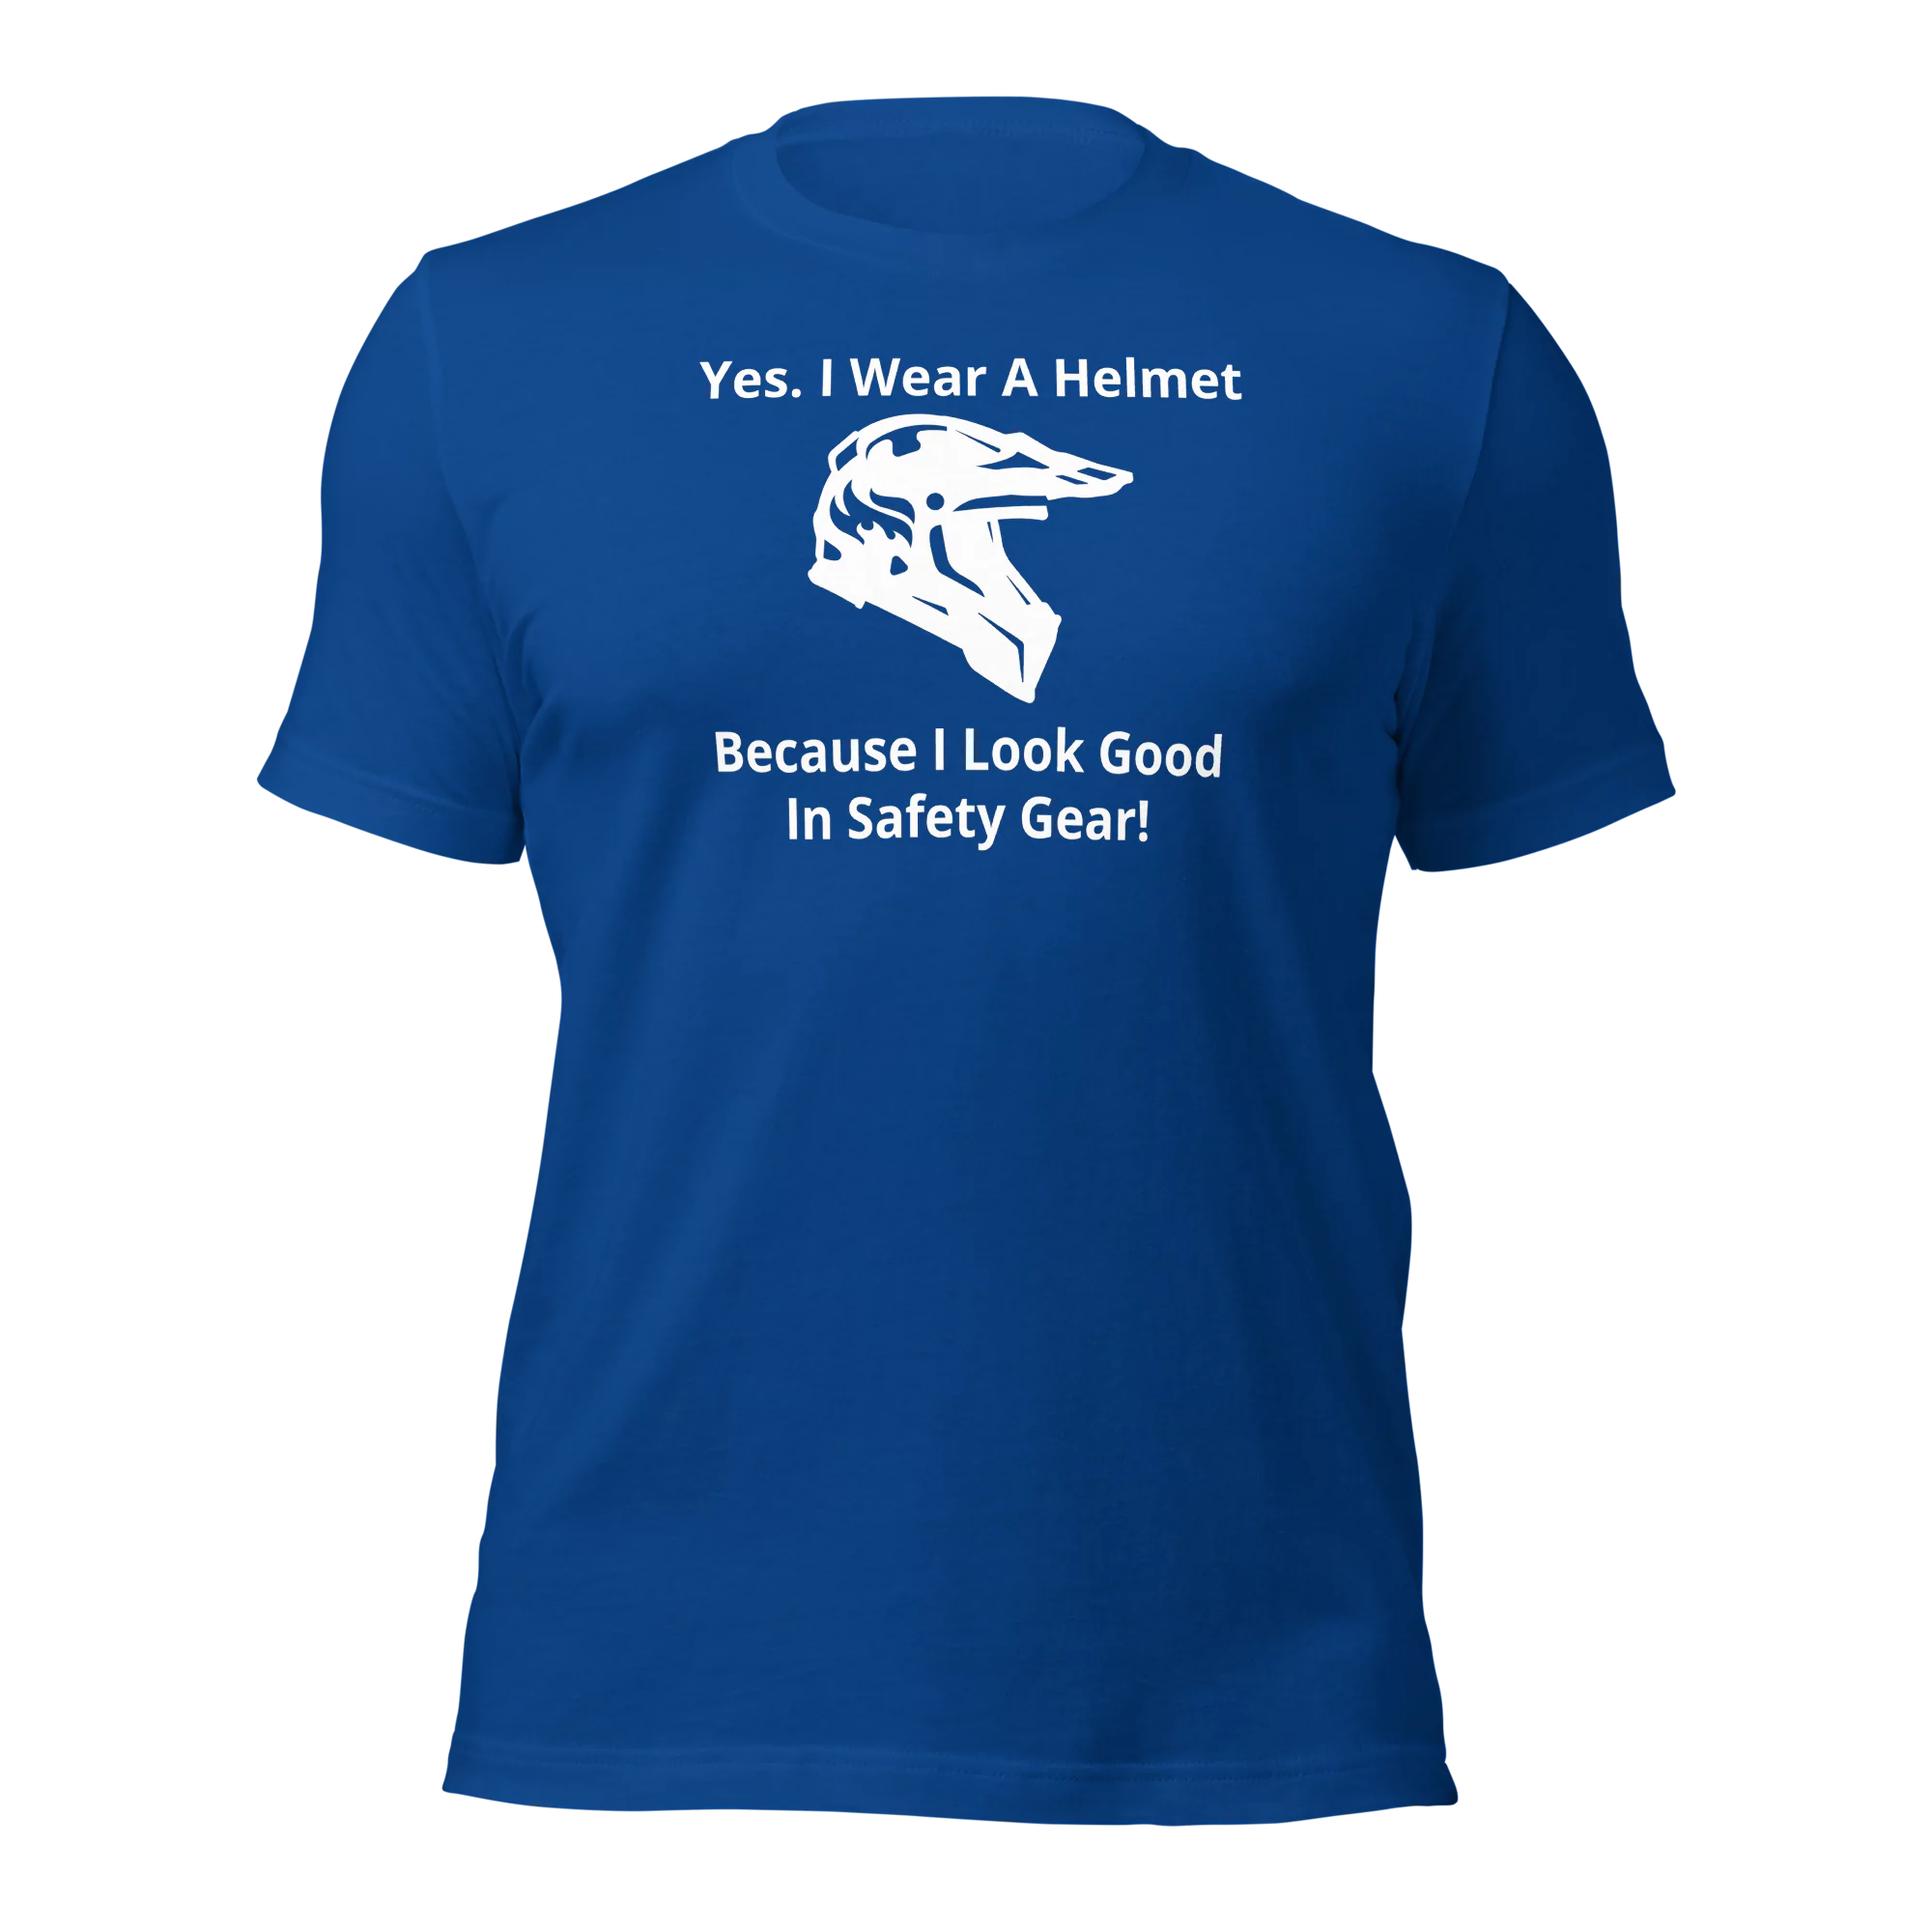 Funny T-Shirt: I Look Good In Safety Gear (Royal Blue)